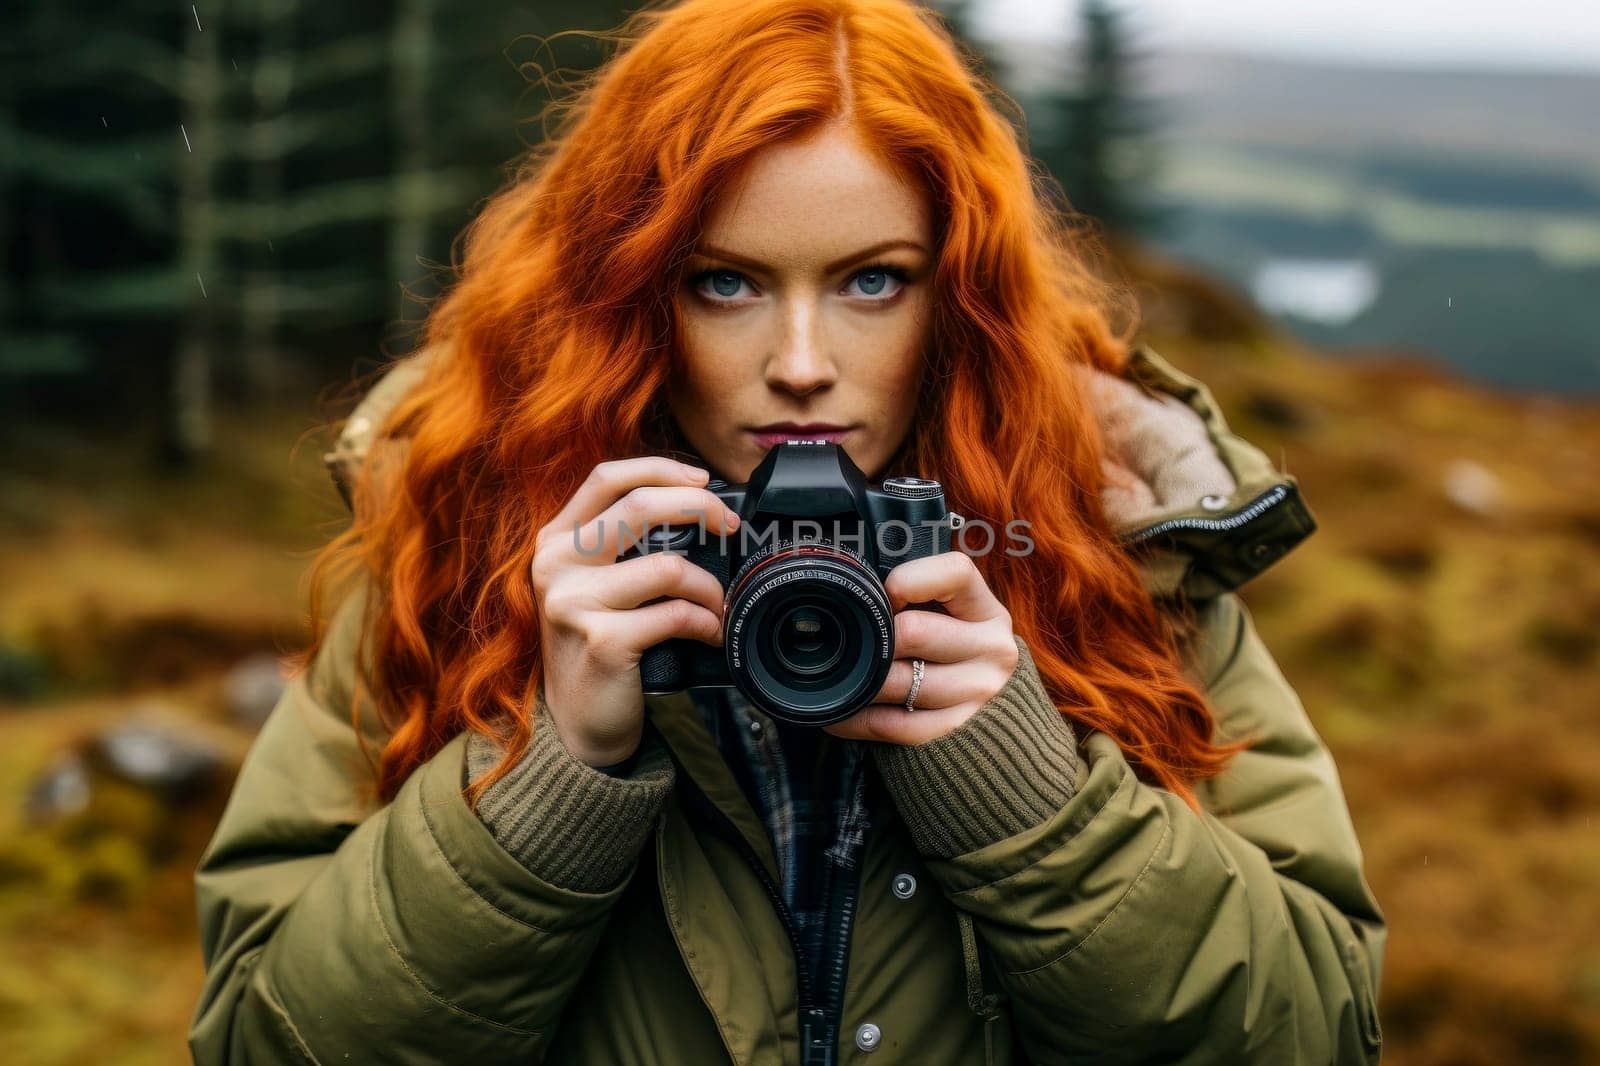 Redheaded Girl Capturing Moments: Photographer with Camera by pippocarlot